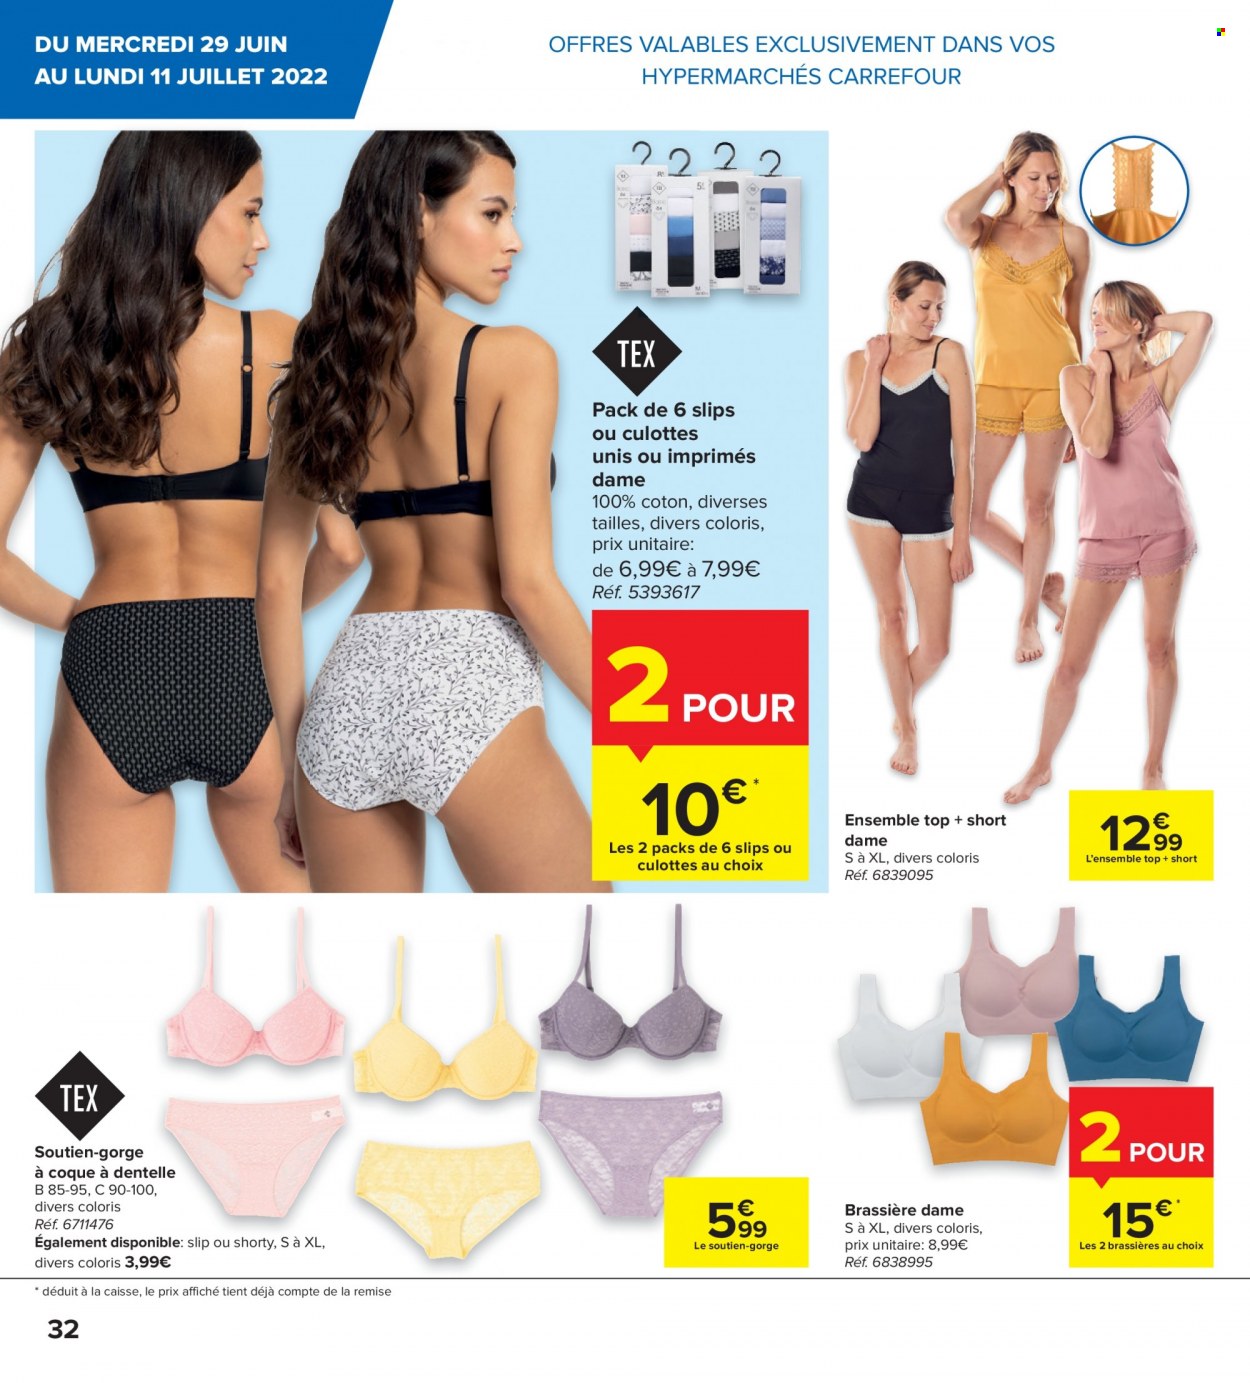 Catalogue Carrefour hypermarkt - 29.6.2022 - 11.7.2022. Page 12.